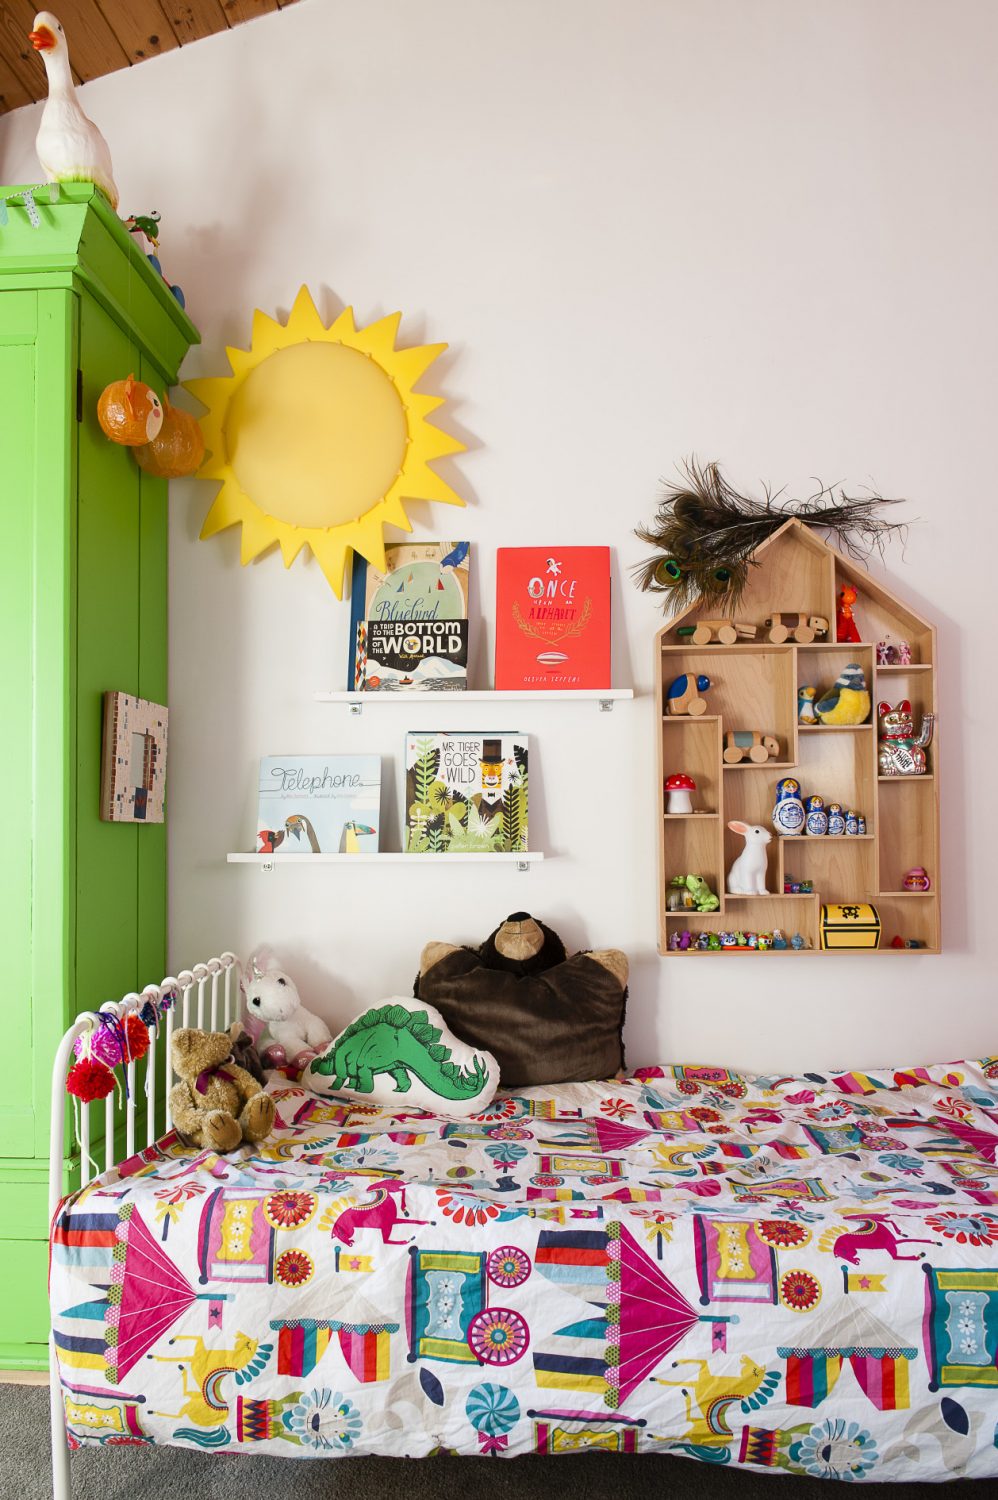 Daughter Esther’s room sports the same dramatic pitched pine ceiling as her parents’. Her wardrobe started life a plain pine but is now a bright pea green. Books and ornaments are kept neatly ordered on floating shelving